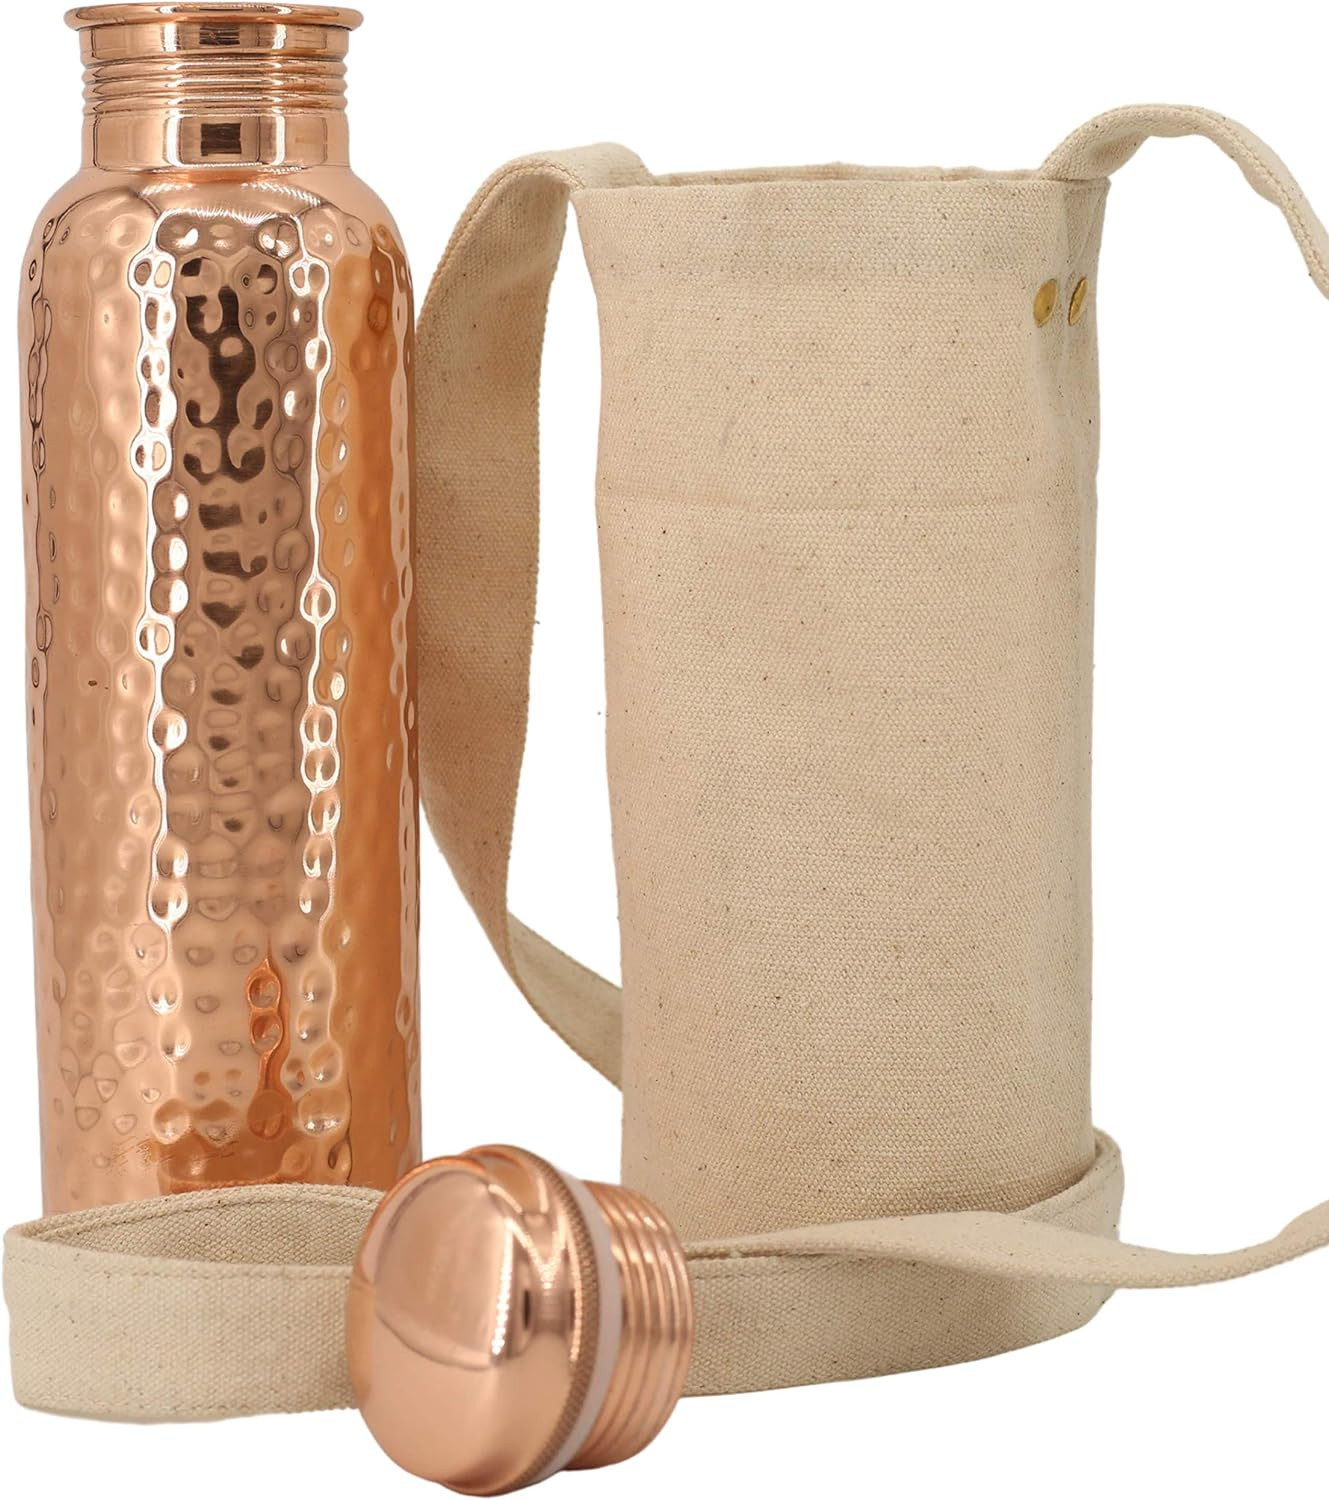 Benefits of Drinking from a Copper Water Bottle